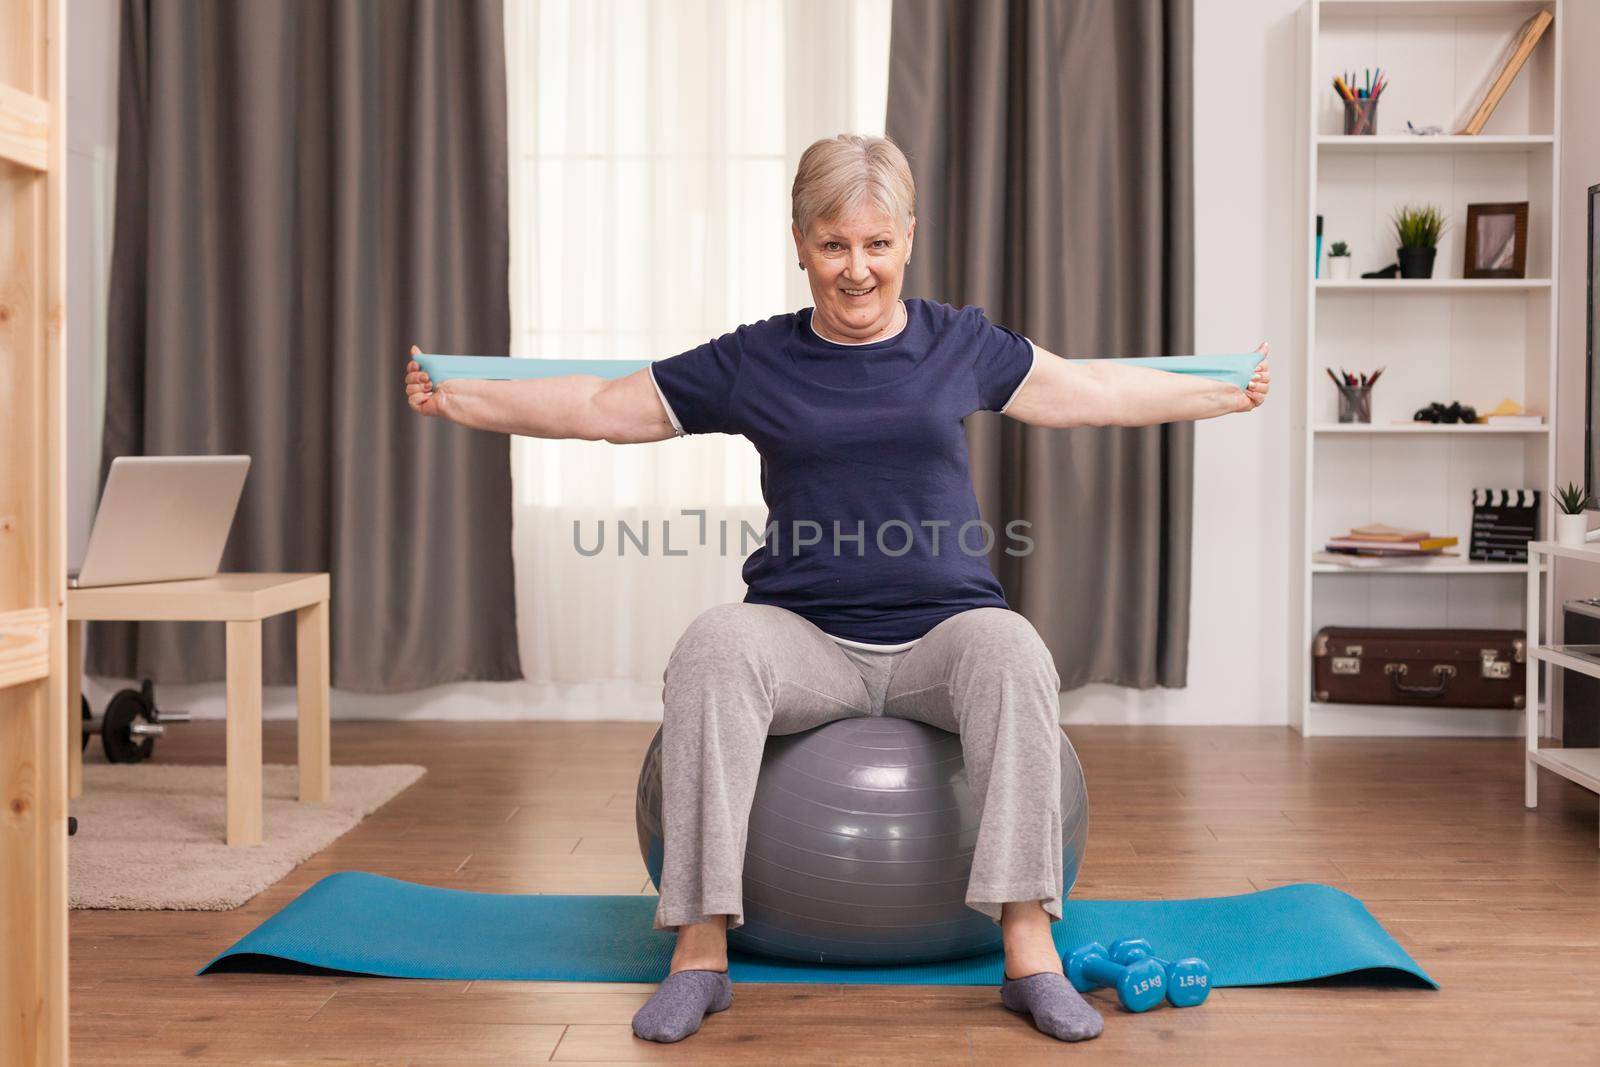 Senior woman working out at home with fitness bands to solve her health problems. Old person pensioner online internet exercise training at home sport activity with dumbbell, resistance band, swiss ball at elderly retirement age